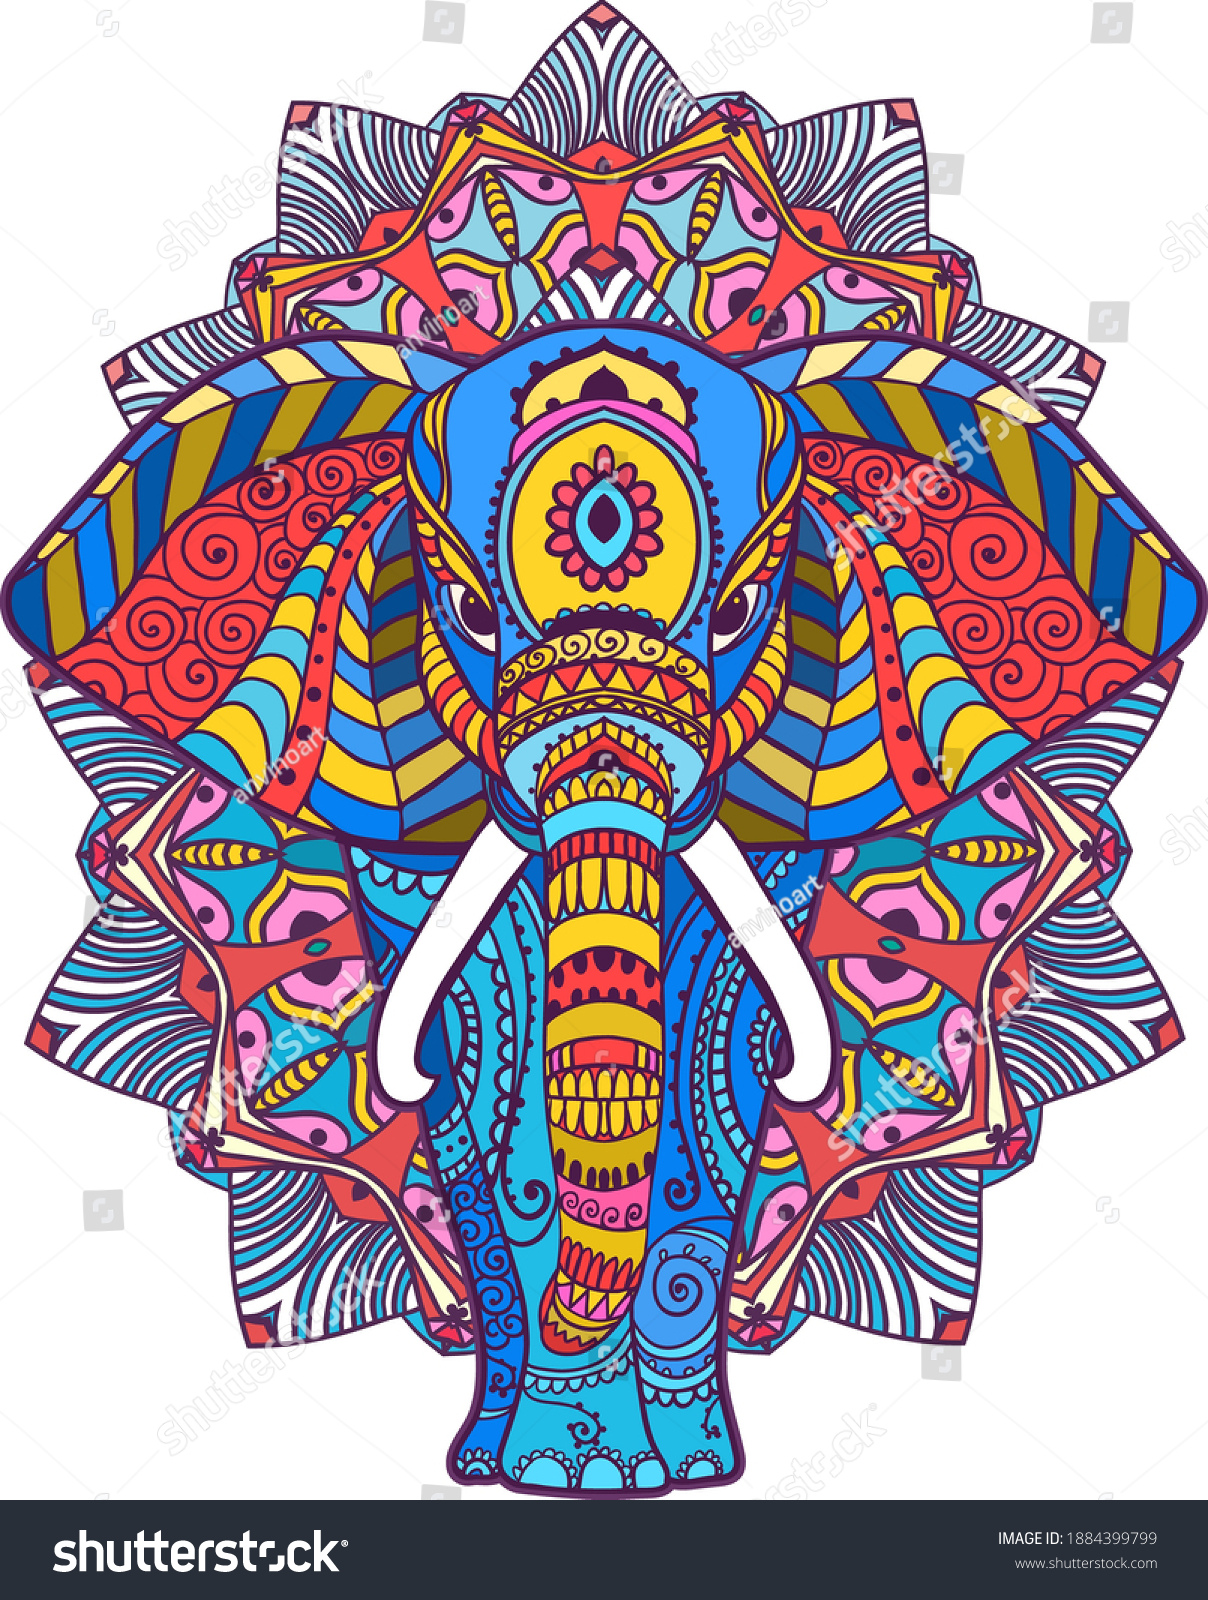 SVG of Elephant card. Frame of animal made in vector. Illustration for design, pattern, textiles. Hand drawn map with Elephant and mandala. Use for children clothes, pajamas svg